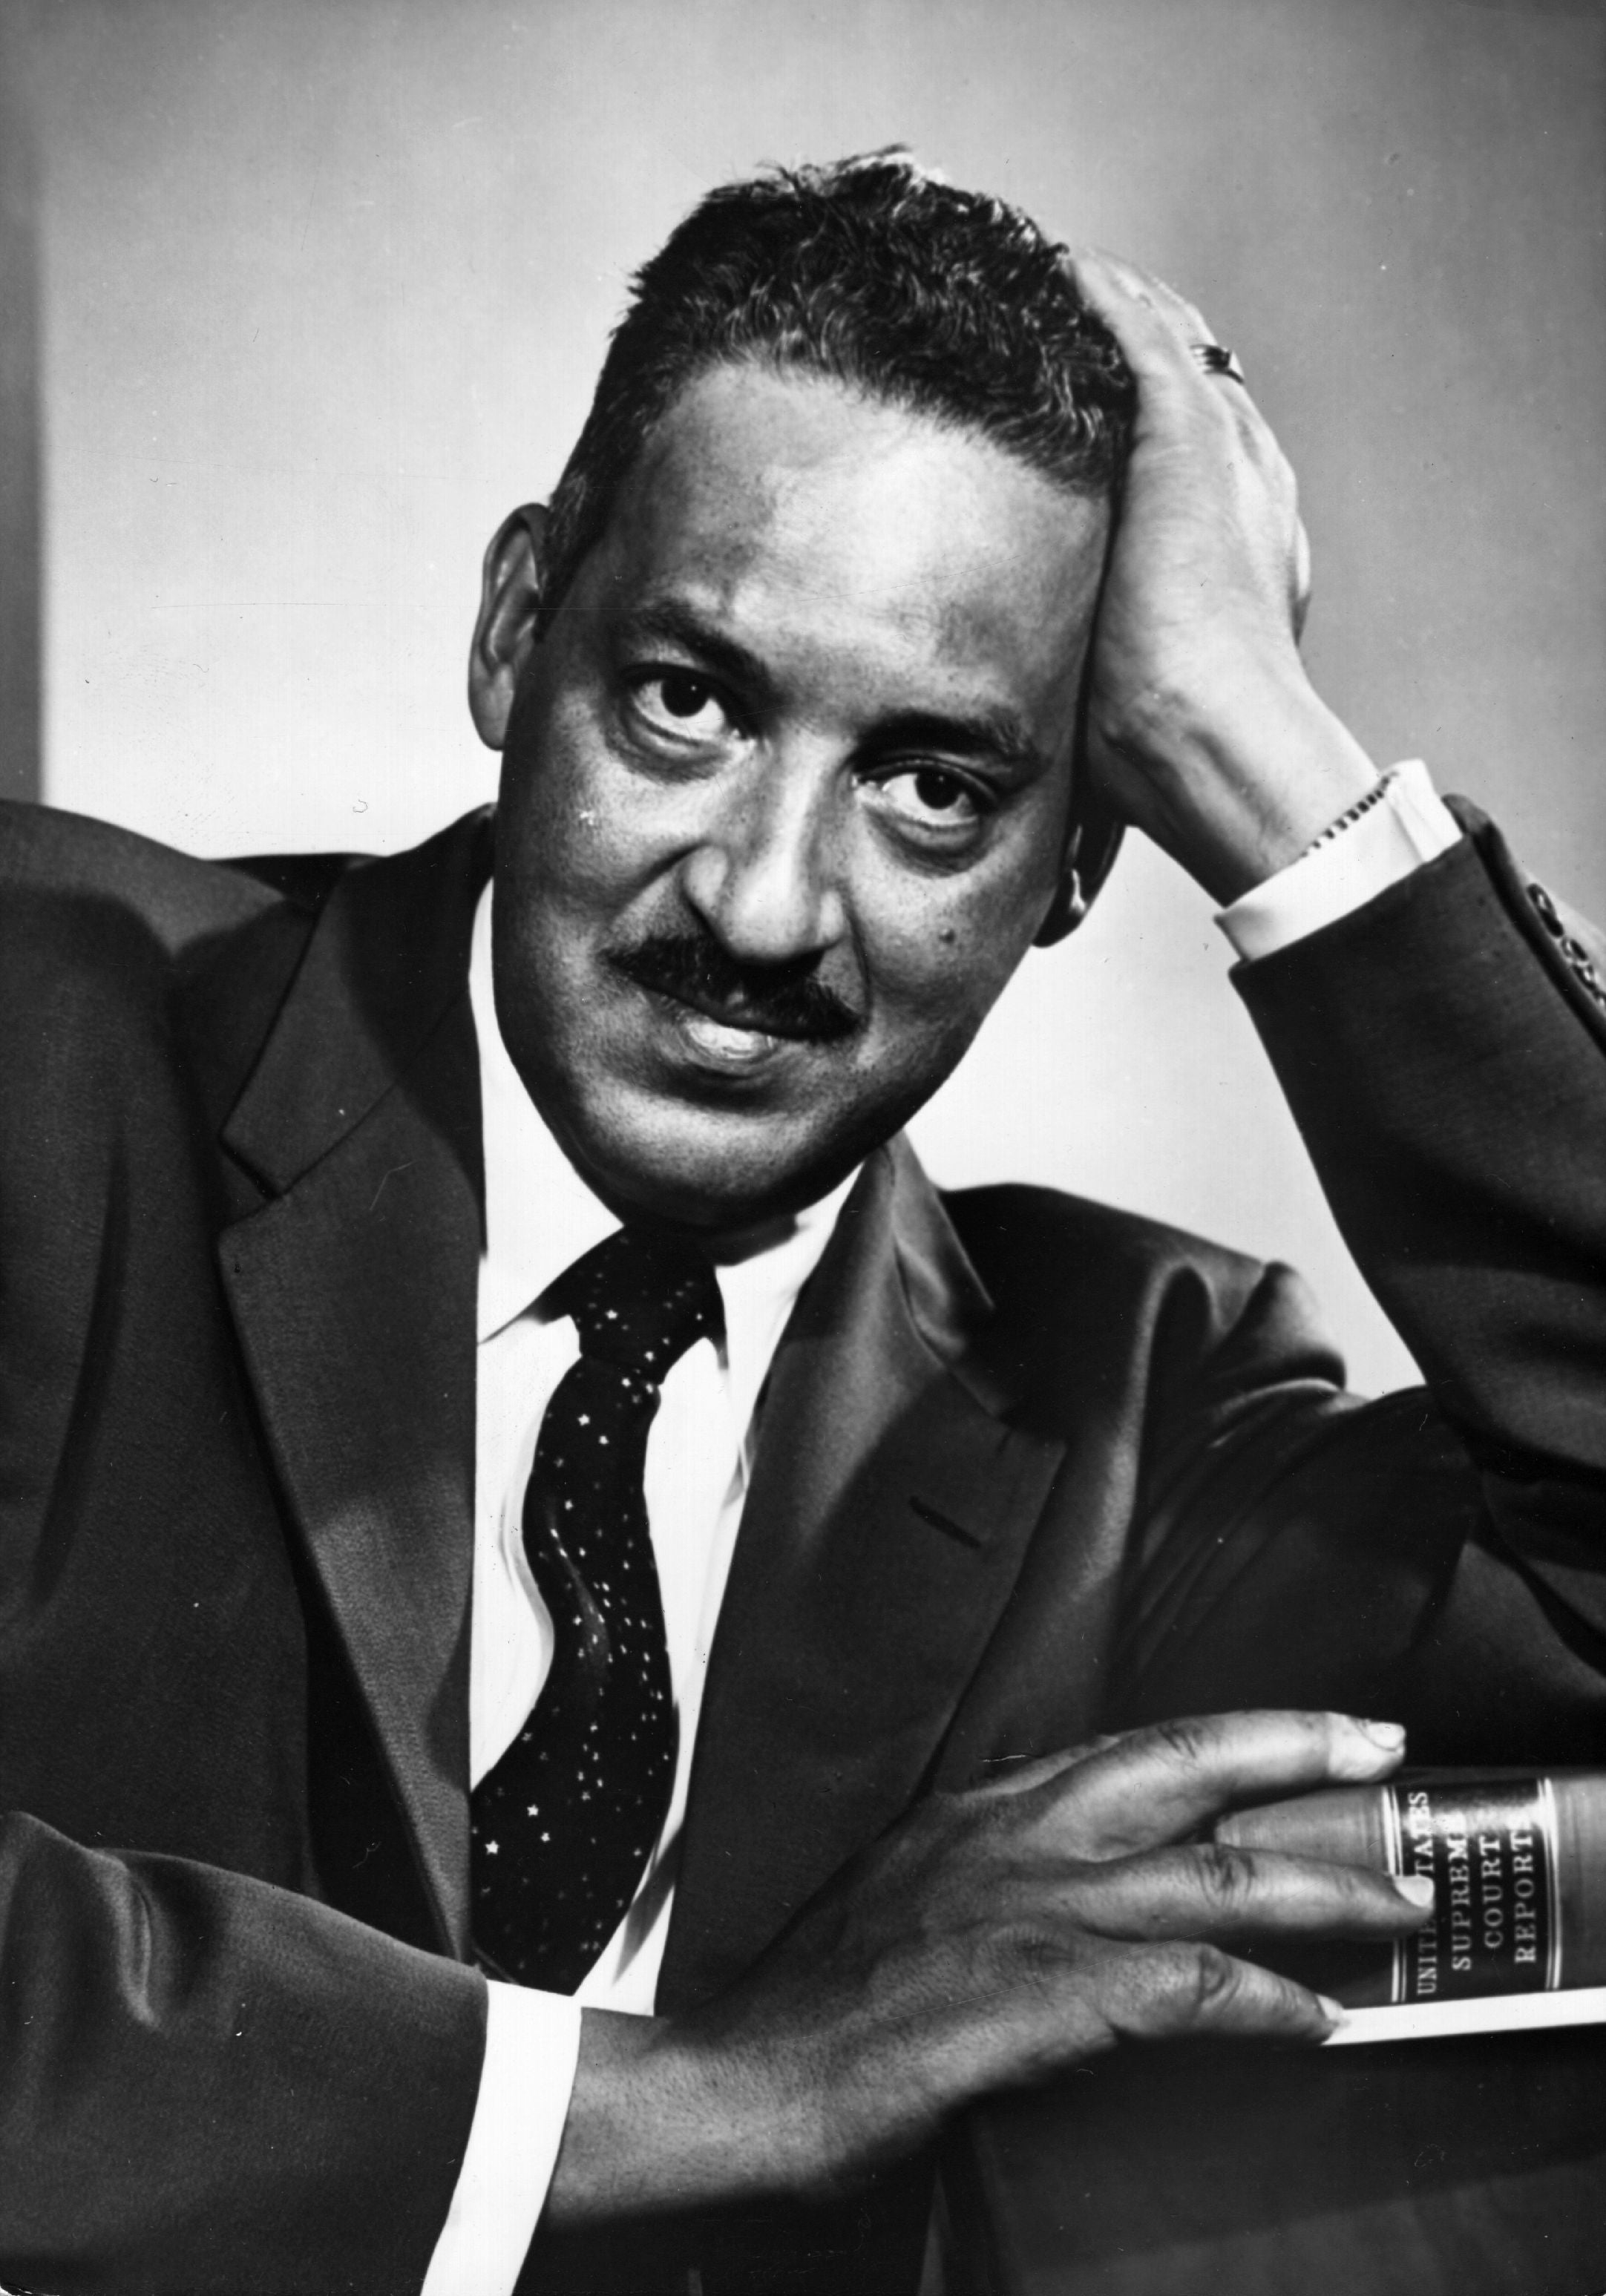 7 Things to Know About Thurgood Marshall Ahead of 'Marshall' Biopic
